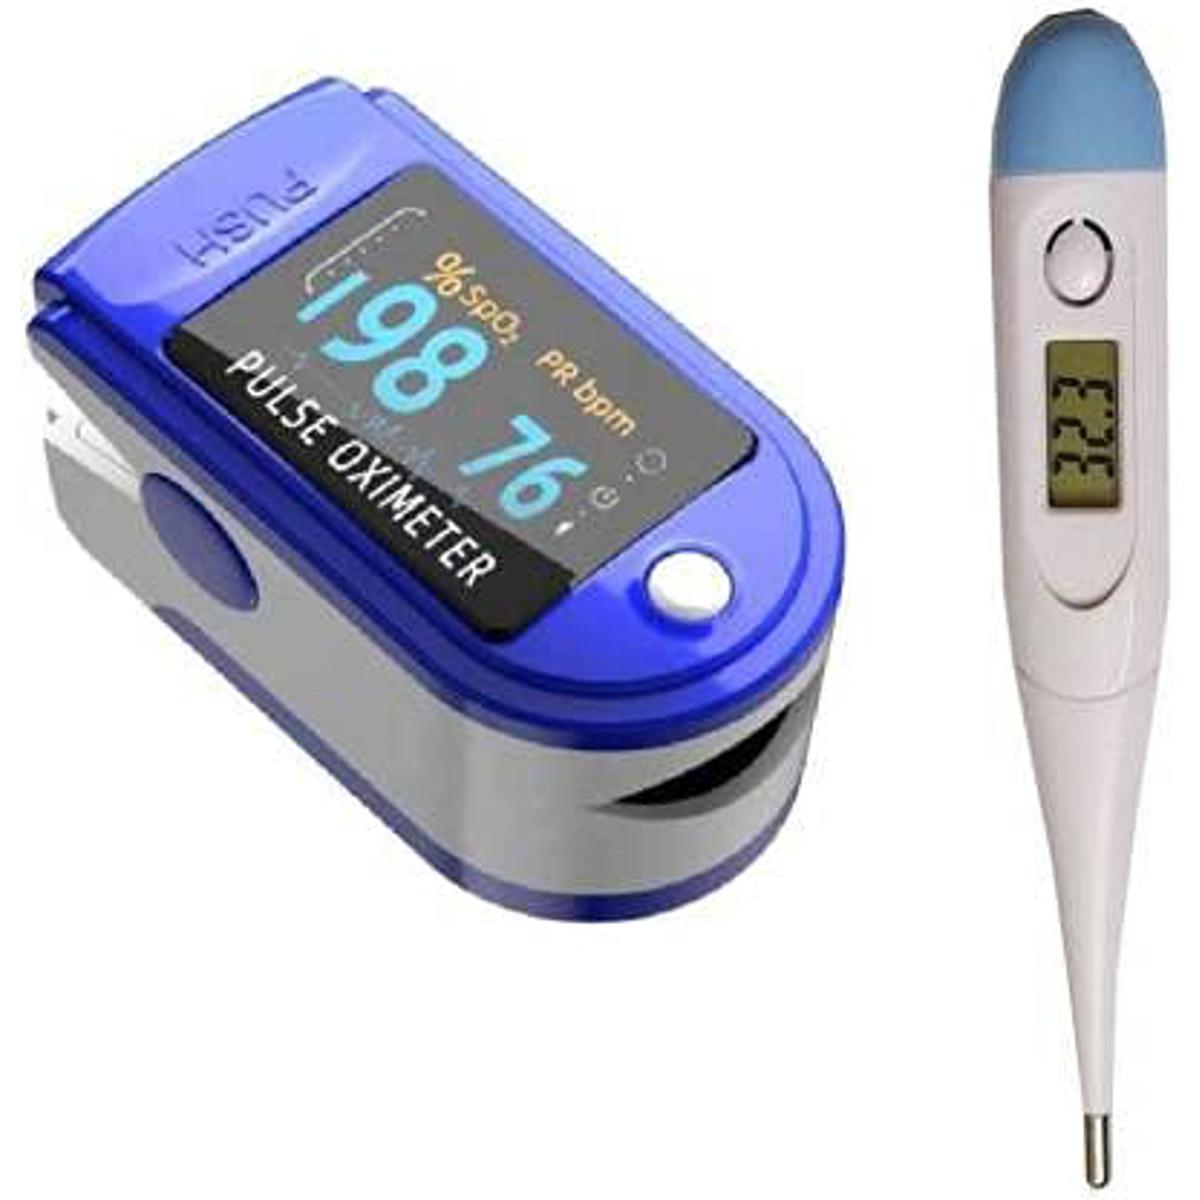 Pulse Oximeter Fingertip And thermometer, Blood Oxygen Saturation Monitor Fingertip Blood Oxygen Meter Finger Oximeter, O2 Monitor Finger for Oxygen (Blue) Combo Offer